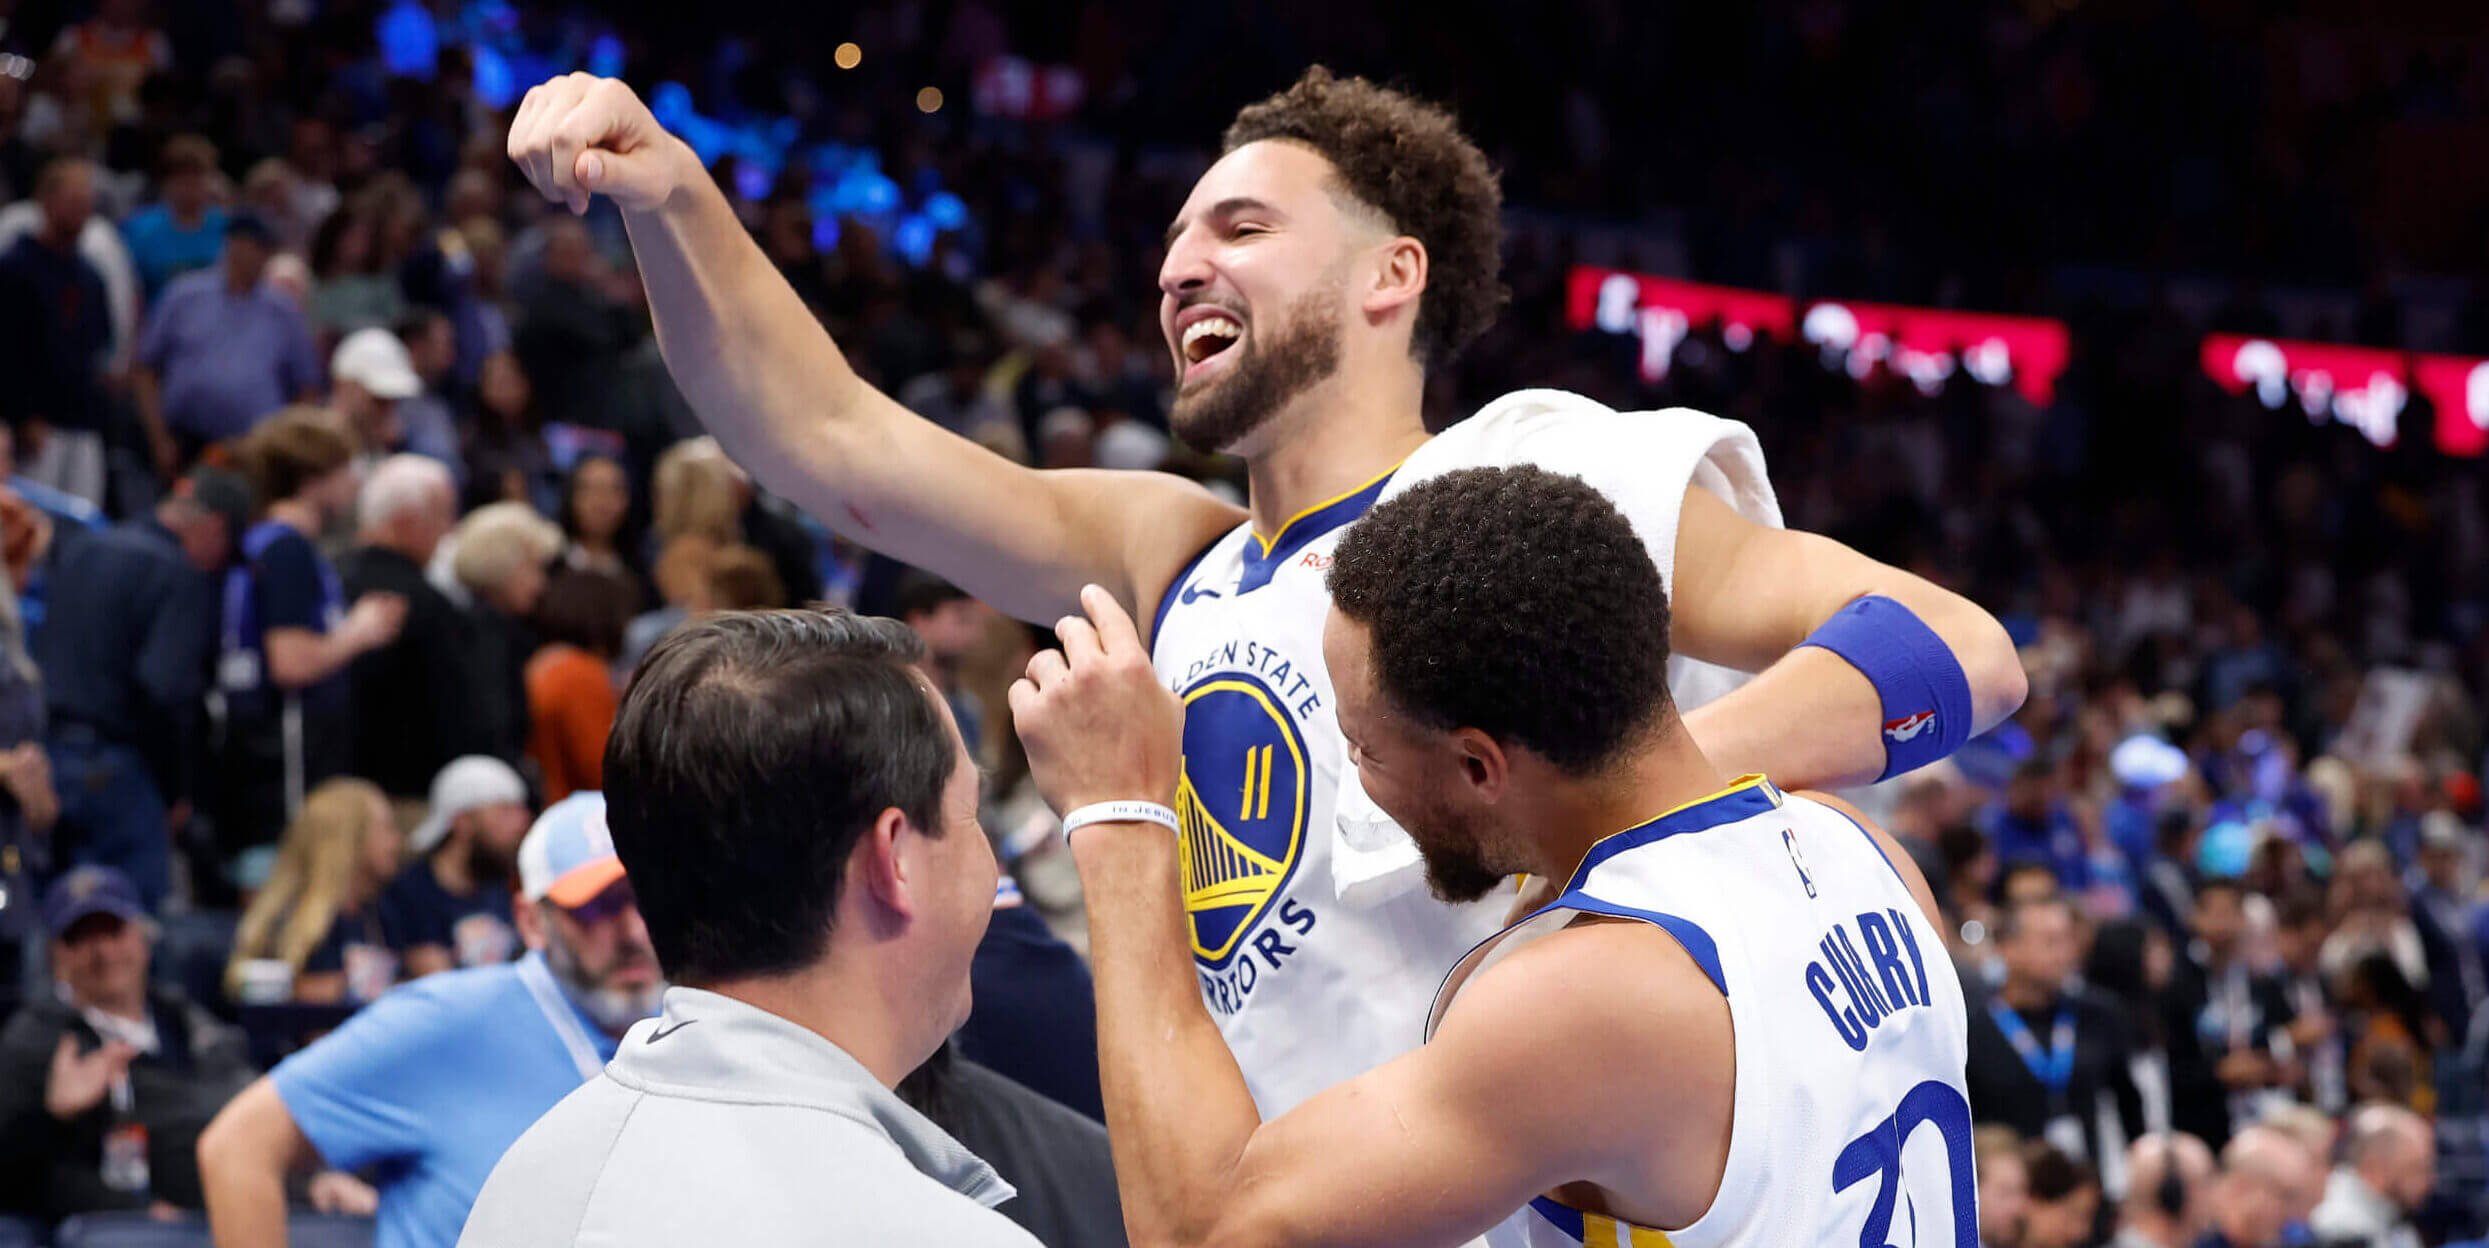 How Klay Thompson’s 13-year run with the Warriors splintered so unceremoniously